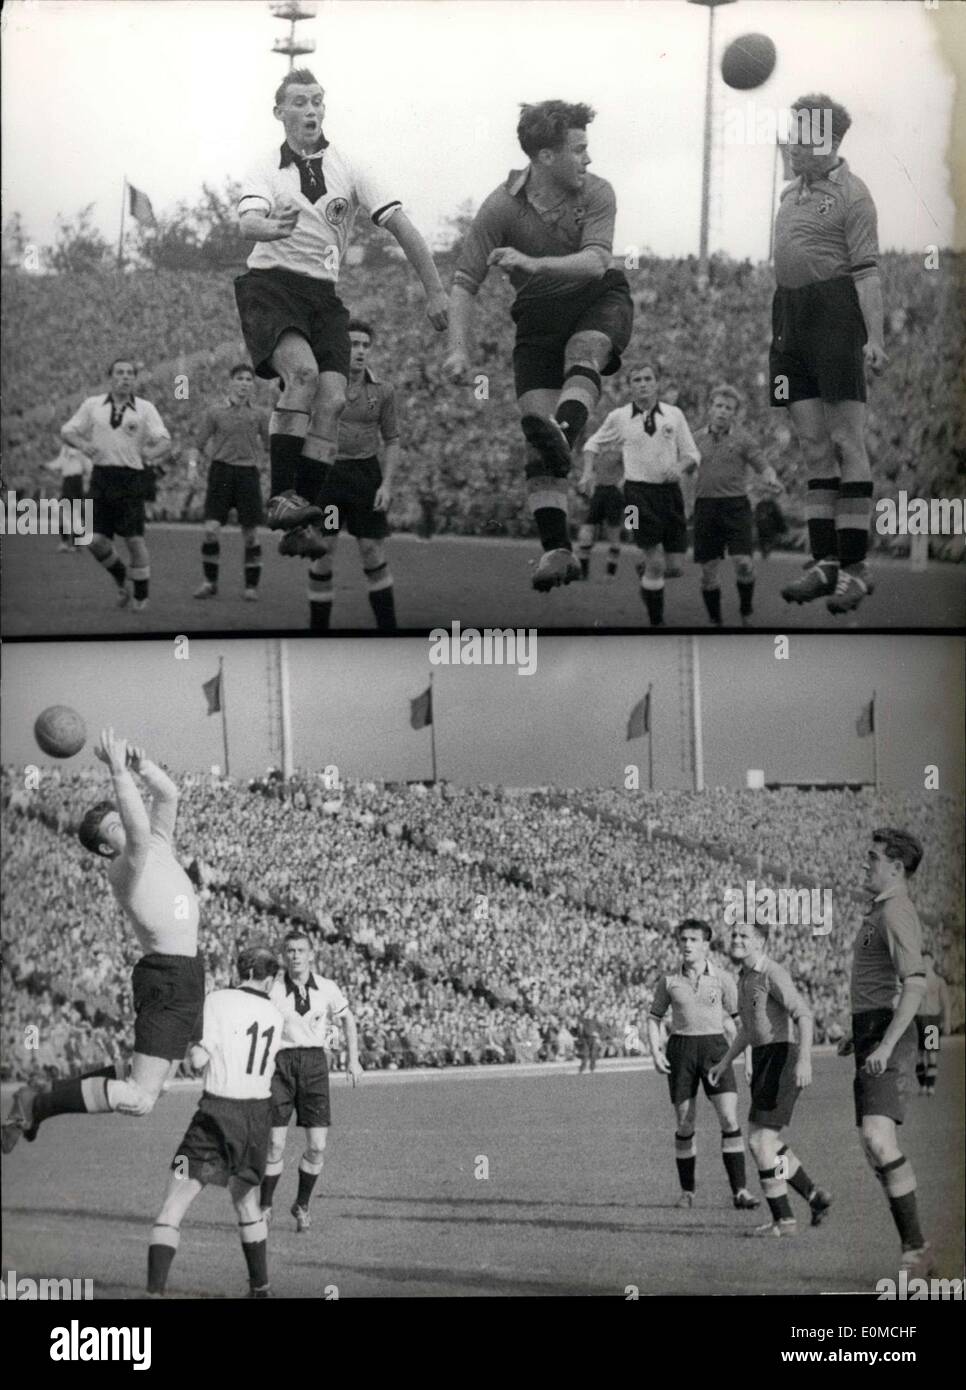 Sep. 26, 1954 - Belgium destroys soccer champions 2:0. In Heysel Stadium in Brussels the German national team was subjected to the Belgian team, losing 2:0. Again and again the German ''storm'' attempted to break through the Belgian defense in order to try and catch up. The outstanding Belgian defense didn't let Rahn(pictured above - left) through to the goal. The Belgian substitute goalkeeper, who was subbed in back in the first half for Gernaer, proved to be solid. Our lower picture shows him punching a sharp shot over the goal. Stock Photo